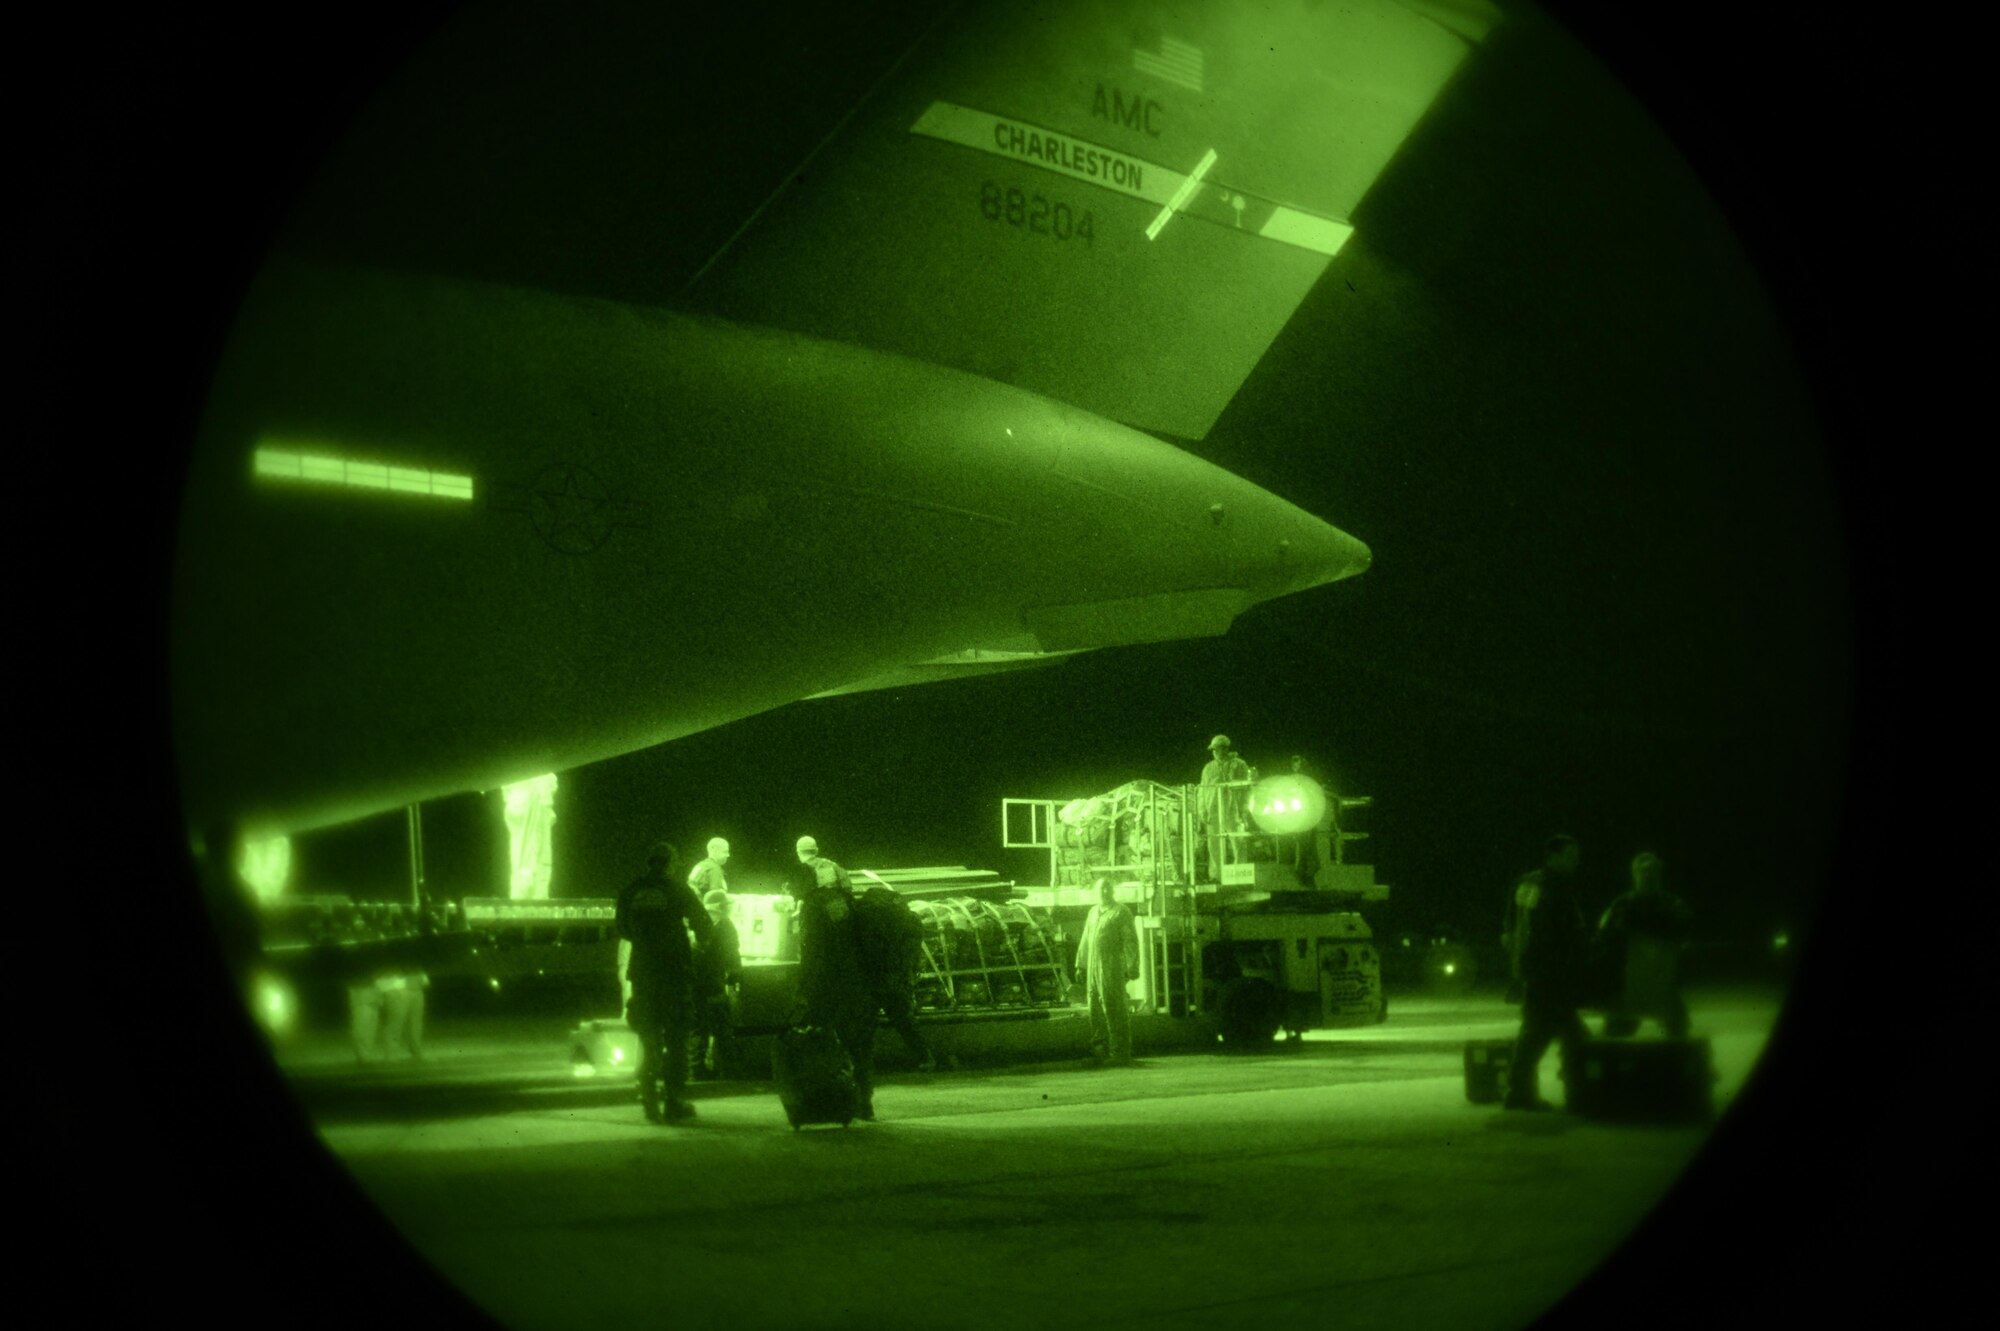 U.S. Air Force Airmen offload relief supplies for victims of the Nepal earthquake from a USAF C-17 Globemaster III April 28, 2015. The Air Force transported relief supplies along with members of the United States Agency to International Development (USAID), the Los Angeles County Search and Rescue team and five search and rescue dogs to Katmandu, Nepal. (U.S. Air Force photo/Airman 1st Class Taylor Queen)